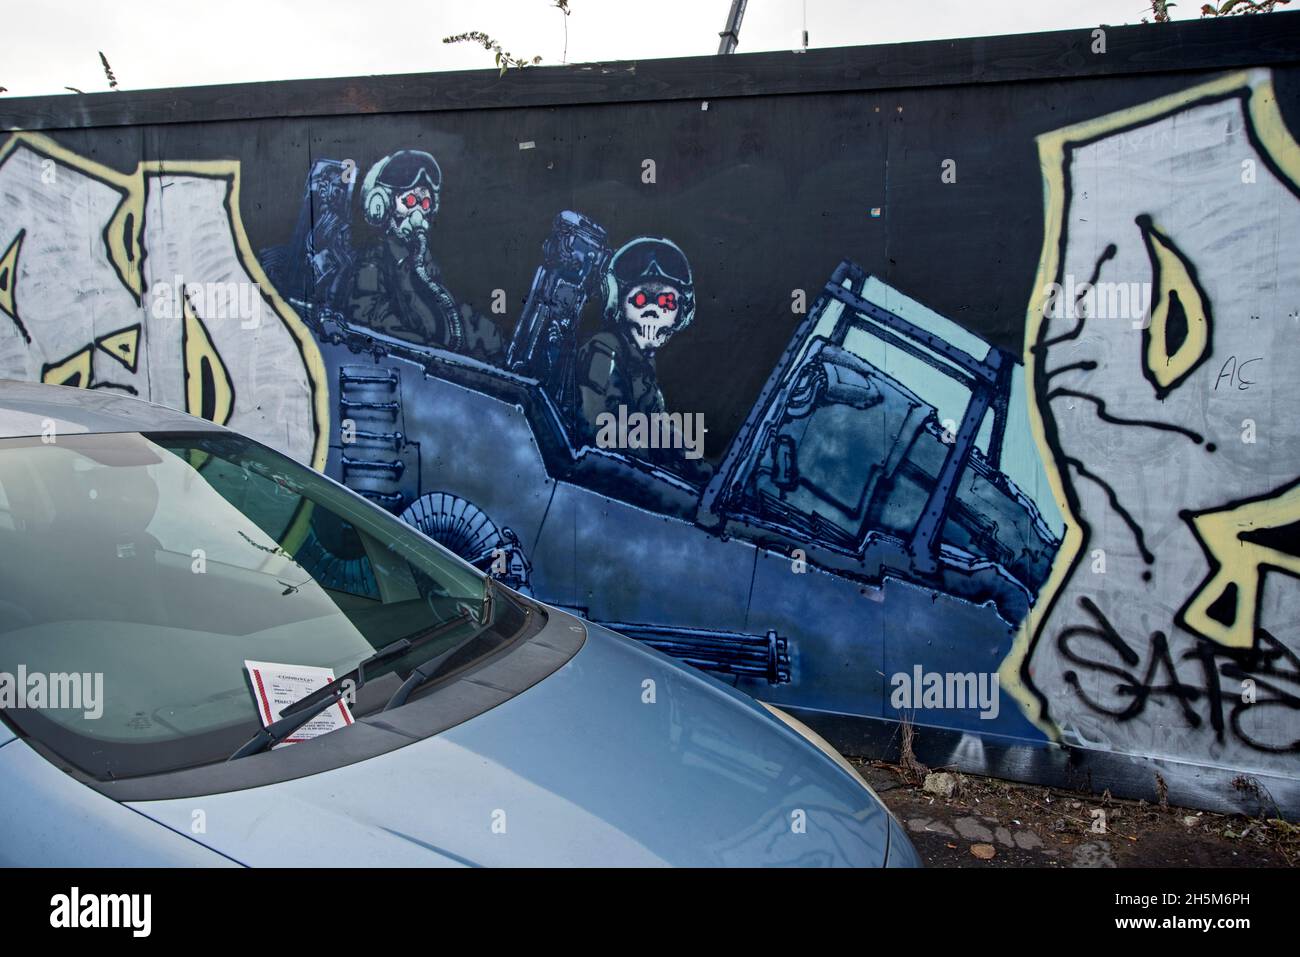 Car with parking ticket parked next to a piece of streetart featuring an aircraft with skeleton pilots. Stock Photo